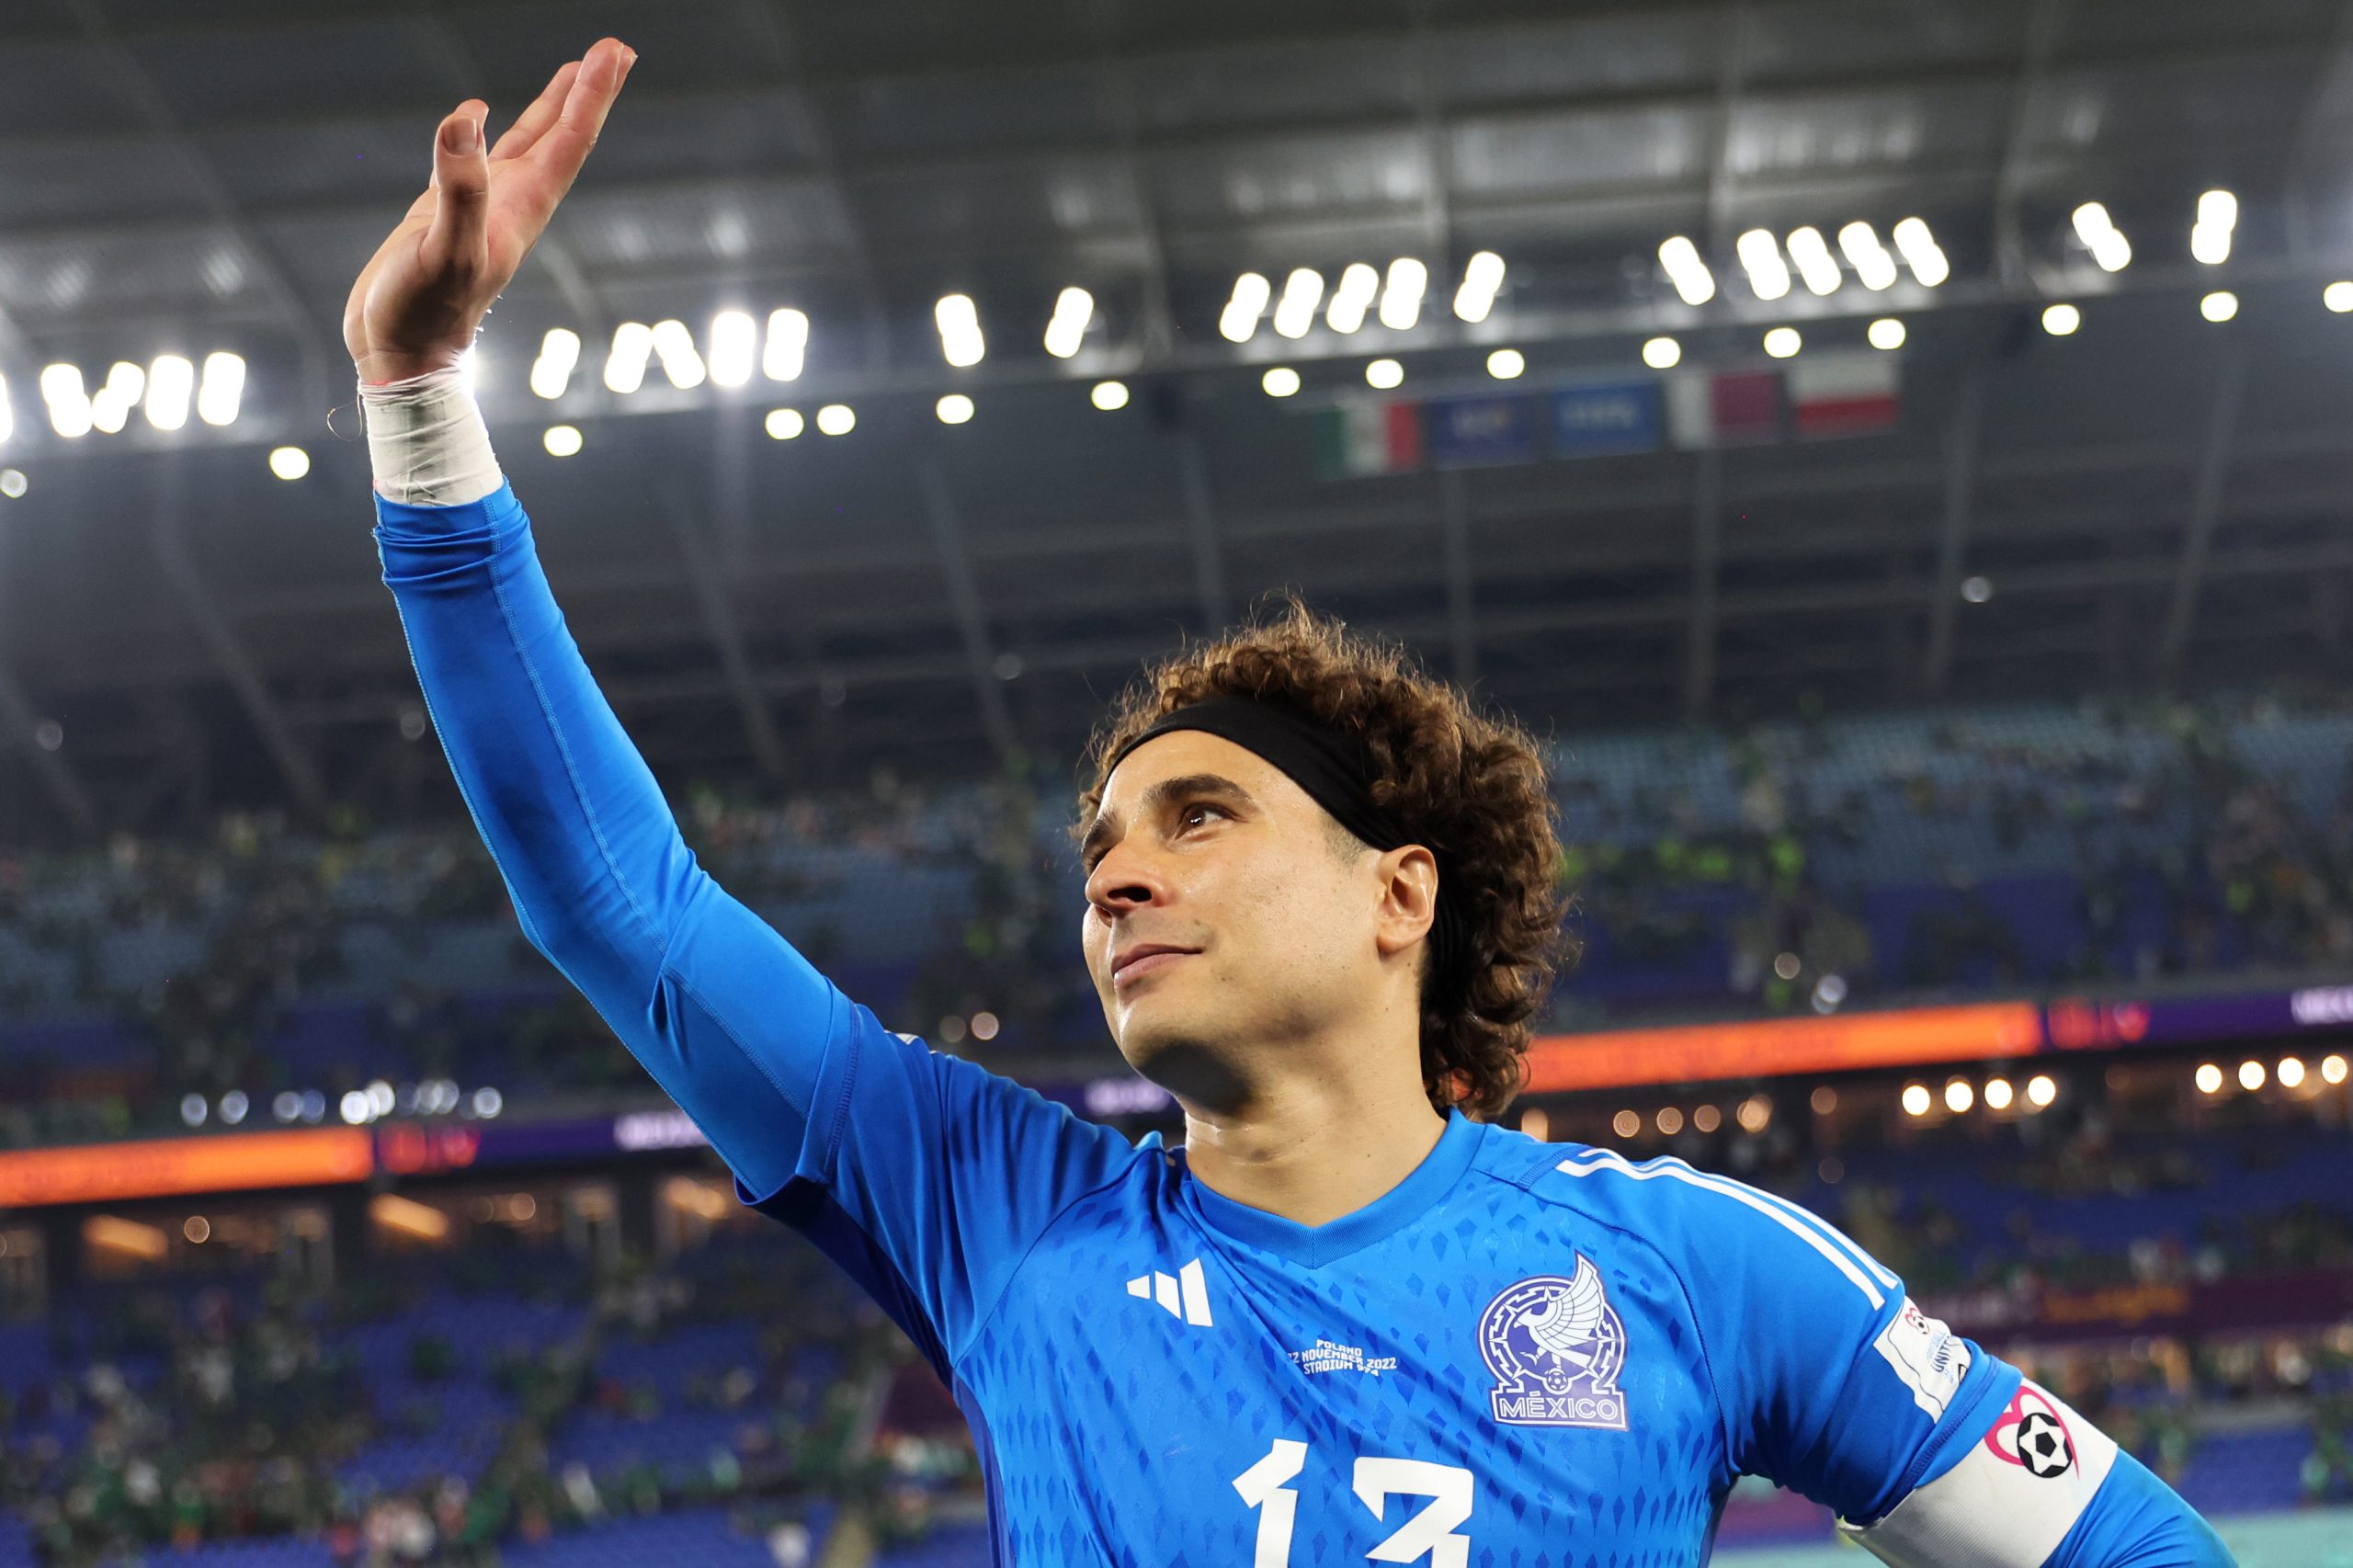 Guillermo Ochoa, waving to the crowd, will play a big part in Argentina vs Mexico